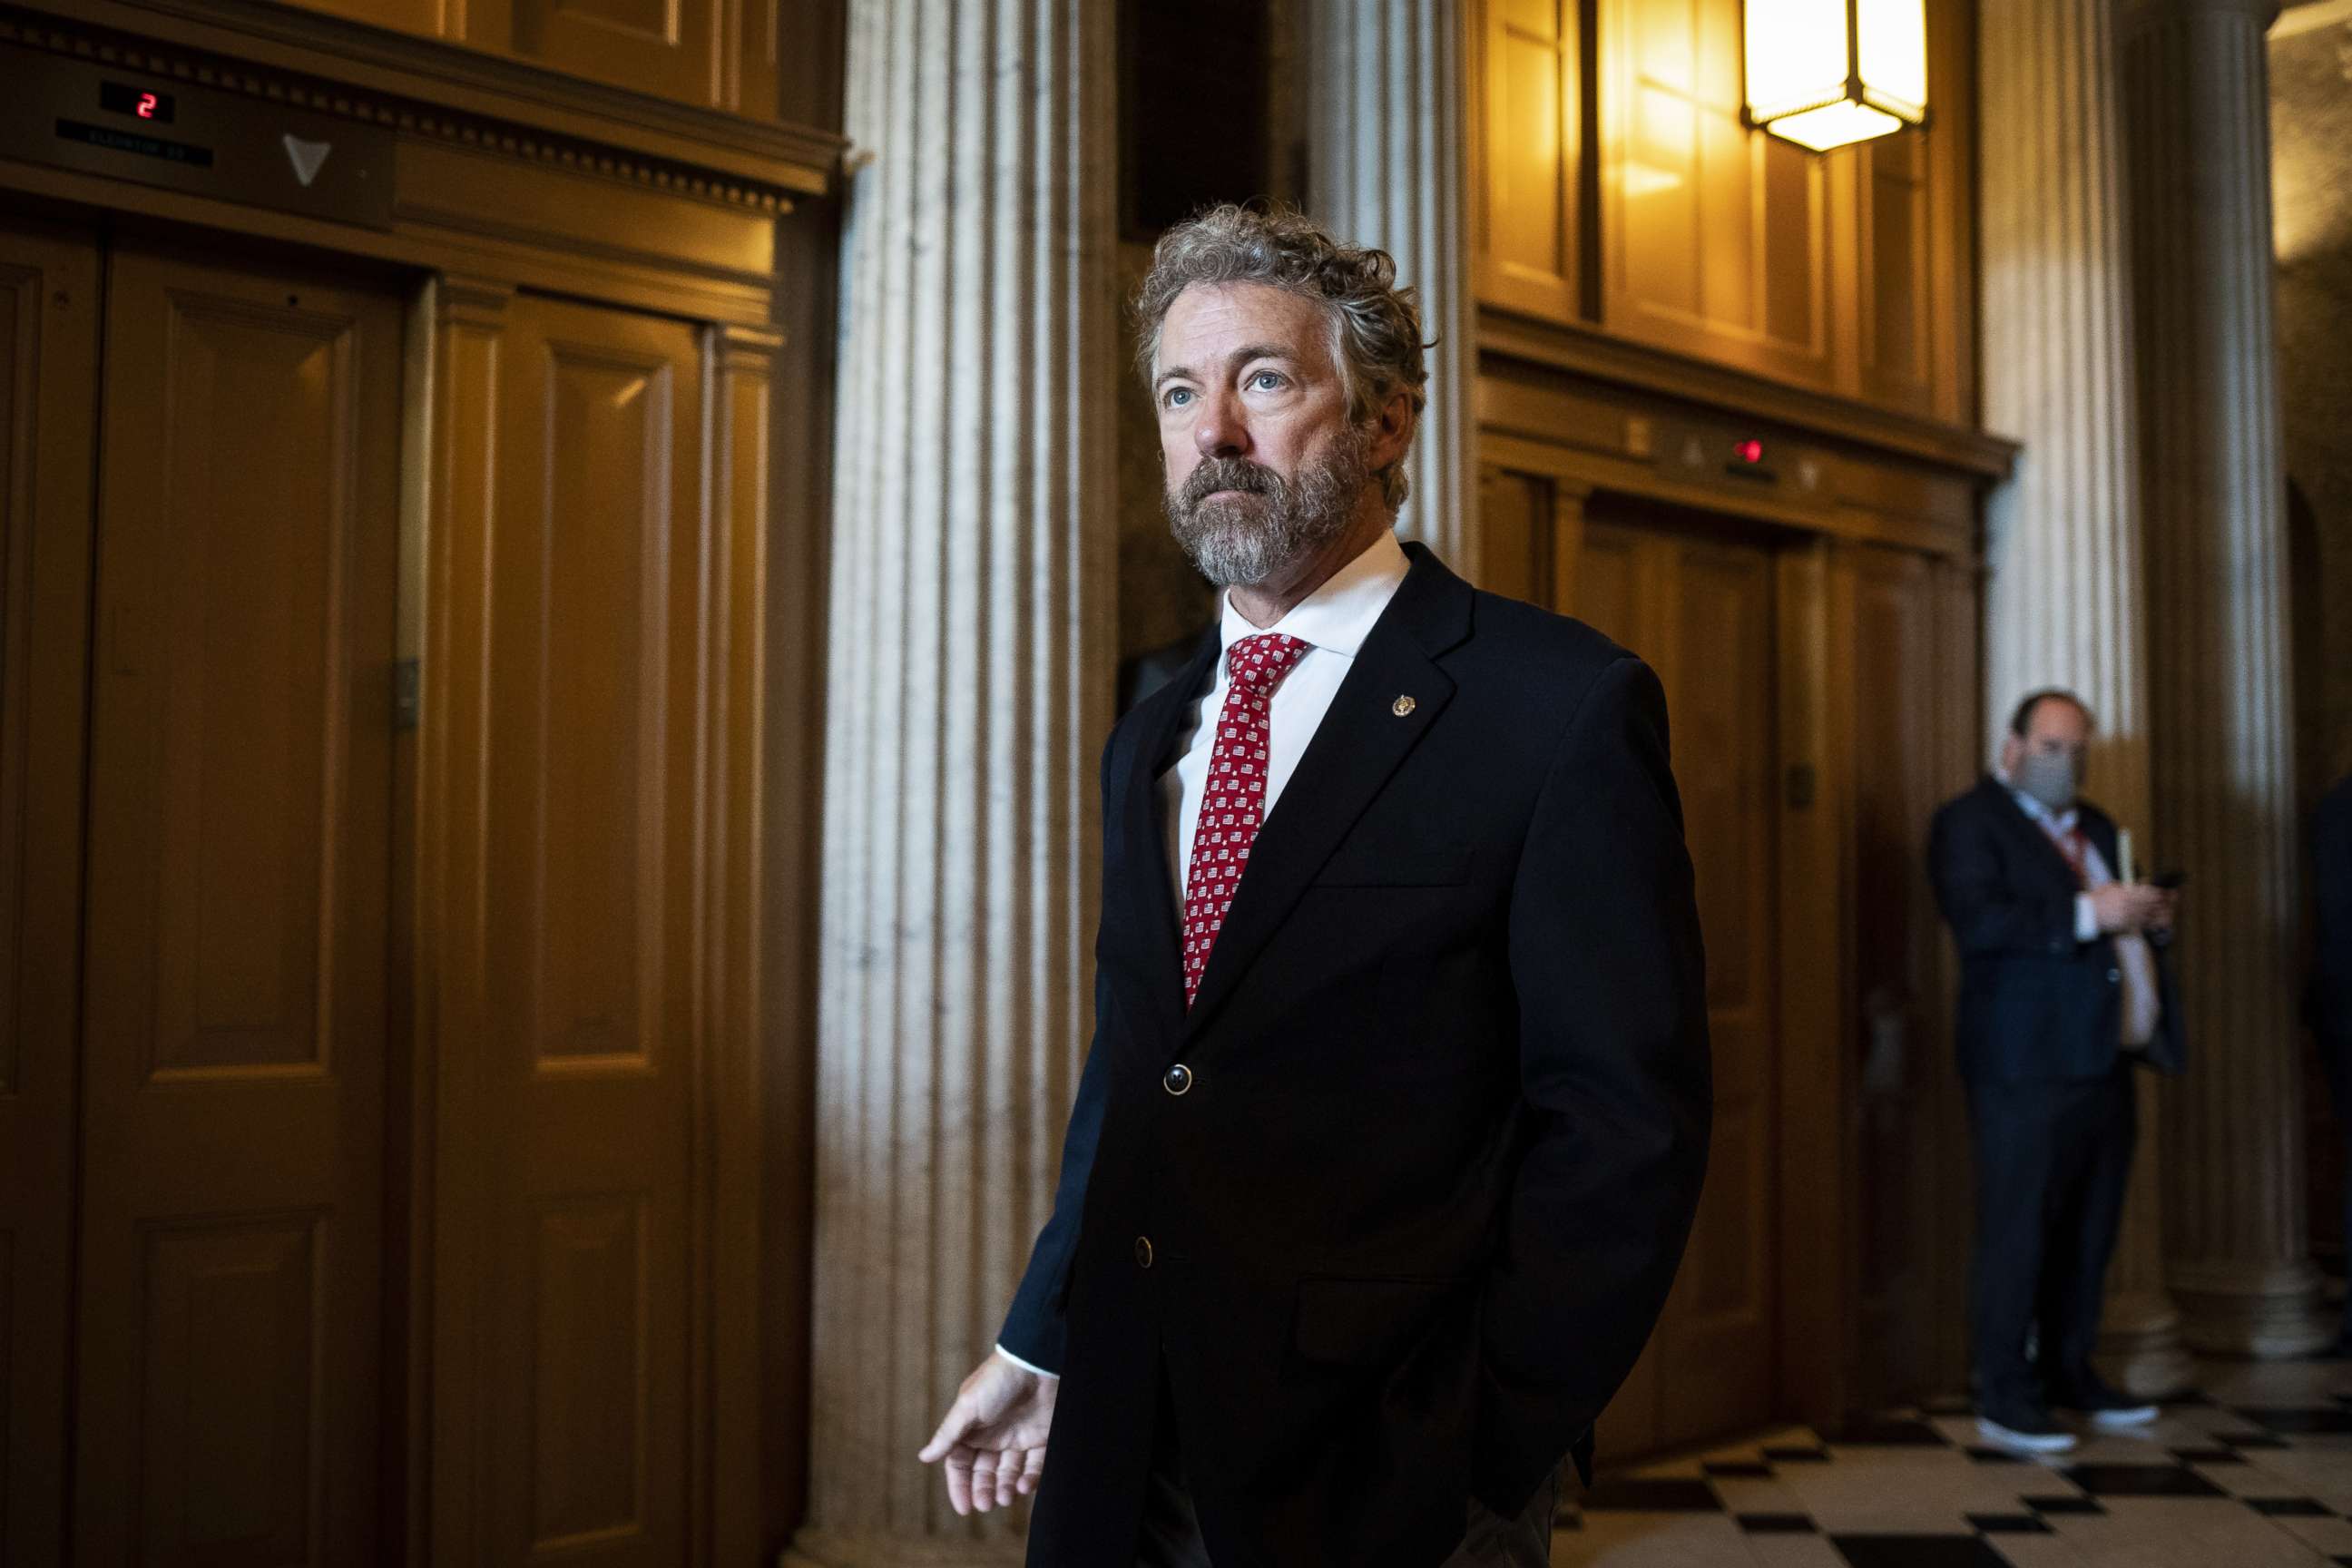 PHOTO: Senator Rand Paul, a Republican from Kentucky, departs following a vote at the U.S. Capitol in Washington, D.C., May, 14, 2020.